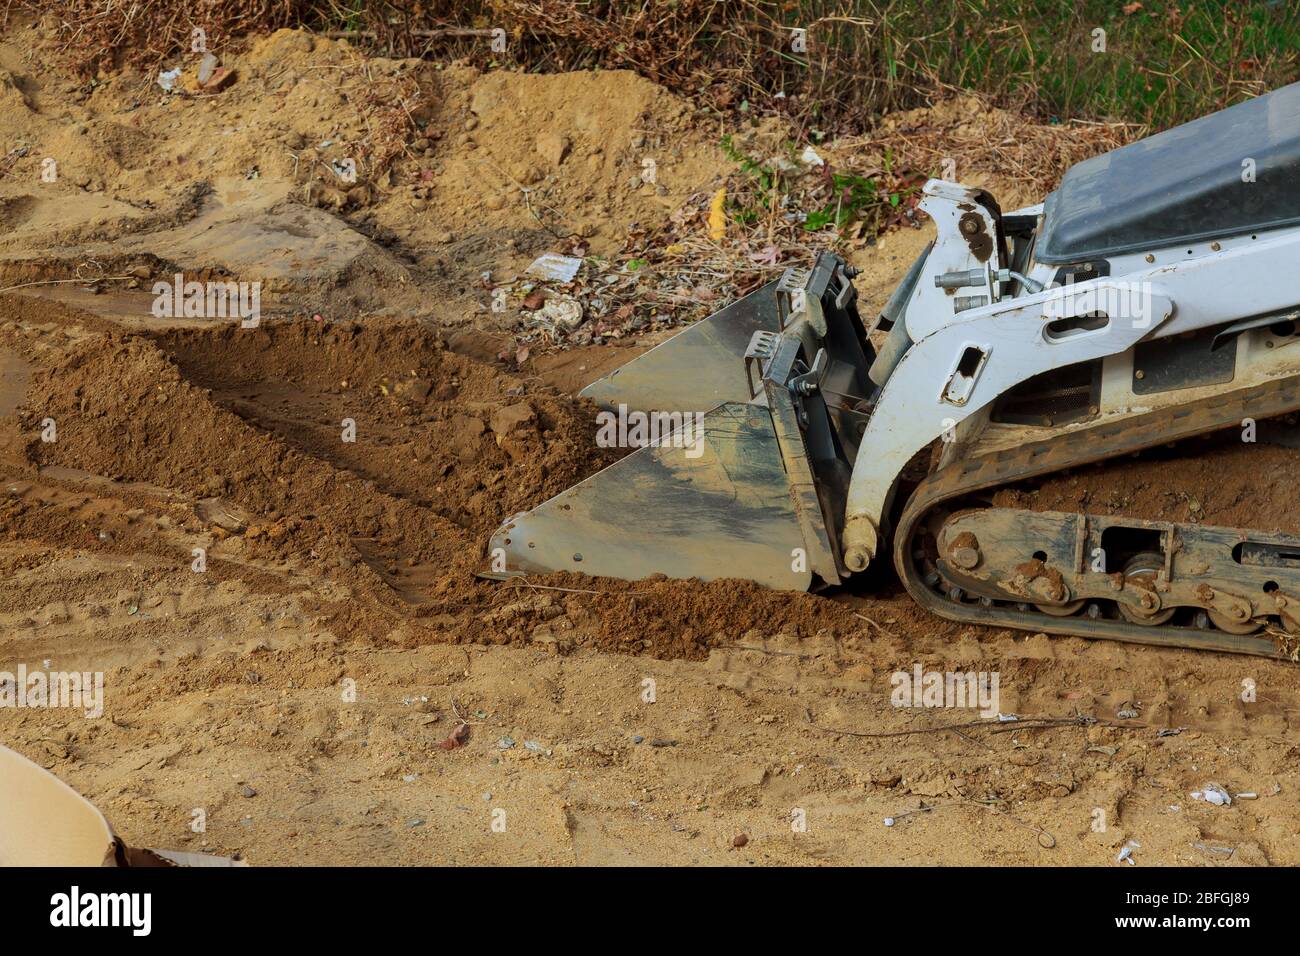 Bulldozer scoop working on the excavation works of moving earth Stock Photo